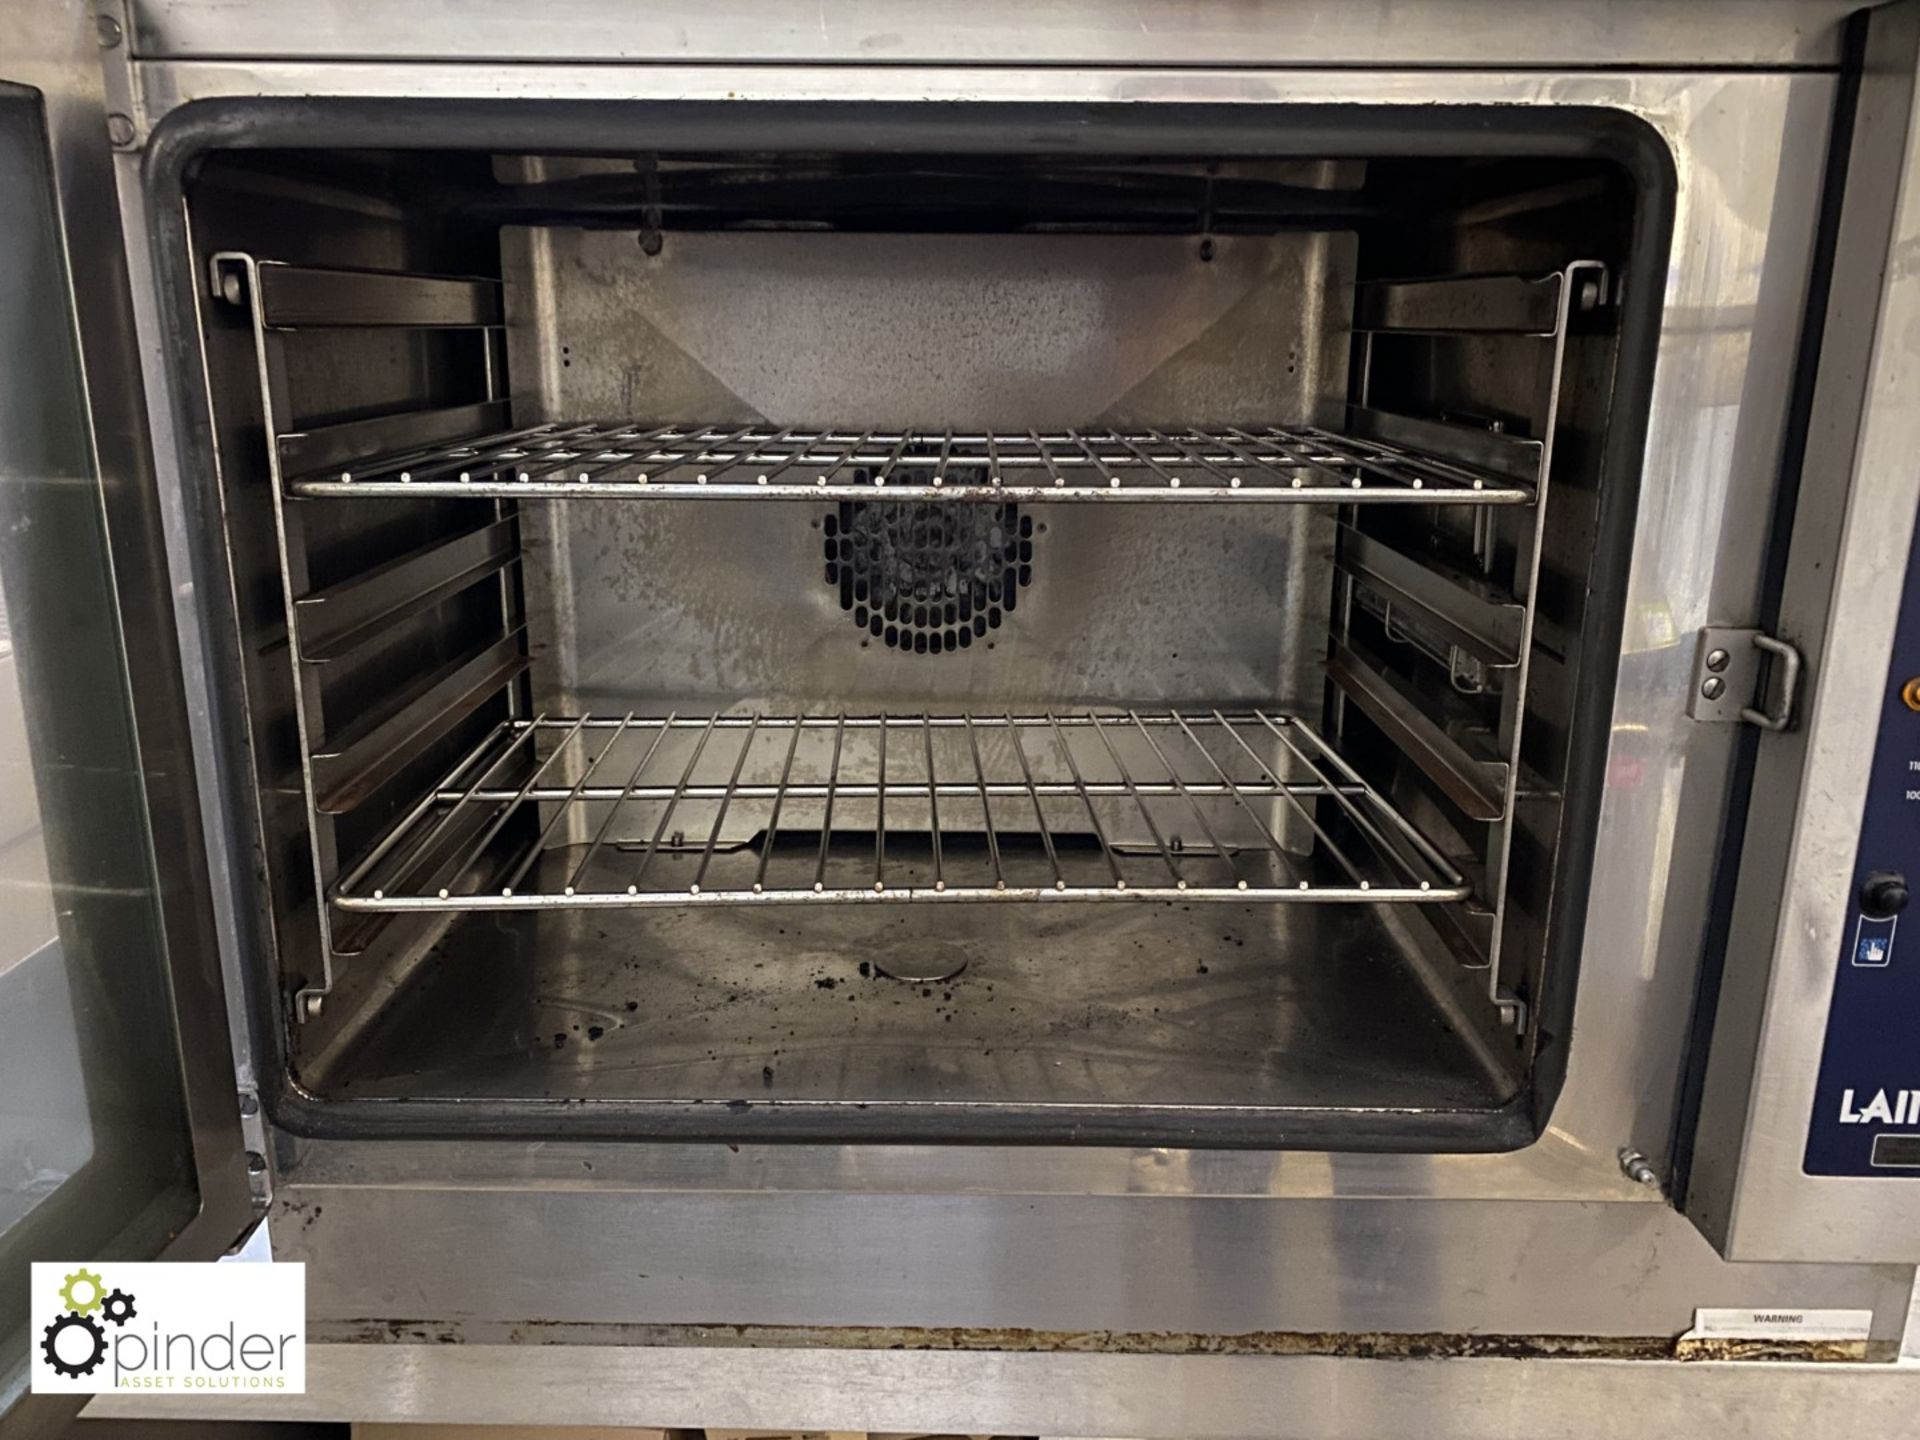 Lainox CE051M stainless steel Oven, 400volts, 850mm - Image 2 of 3